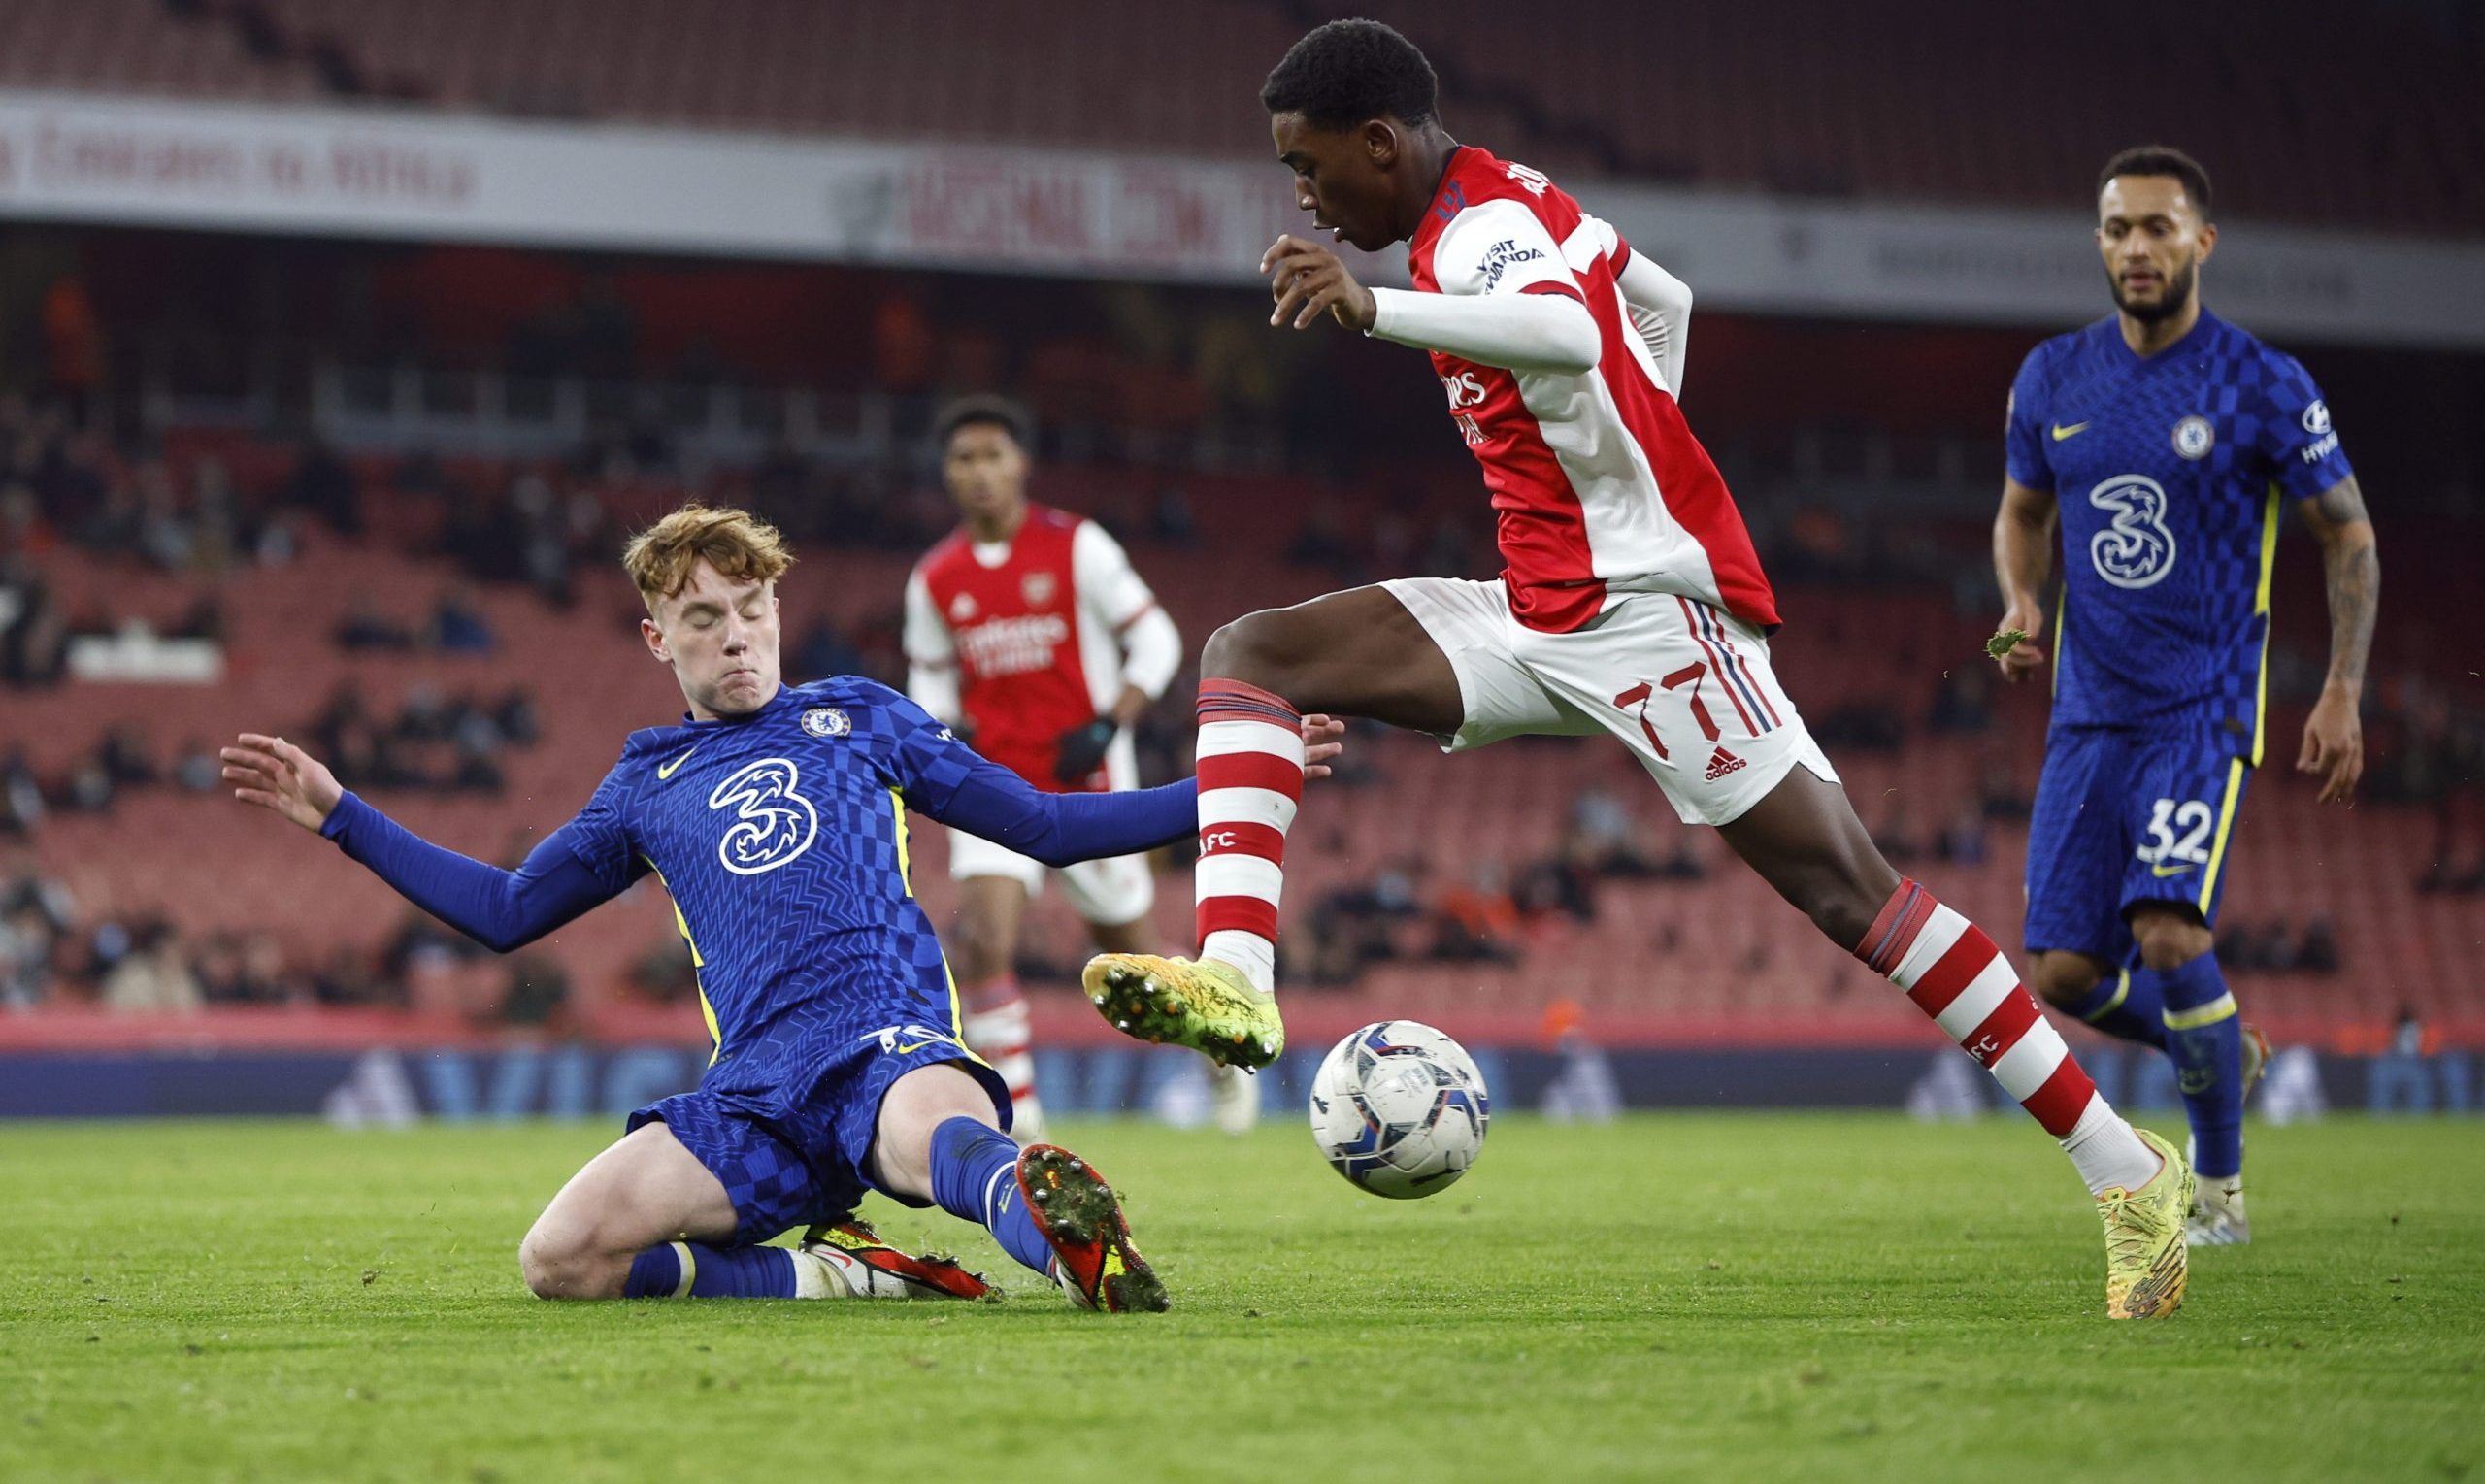 Soccer Football - EFL Trophy - Arsenal U21 v Chelsea U21 - Emirates Stadium, London, Britain - January 11, 2022 Arsenal U21's Khayon Edwards in action with Chelsea U21's Brodi Hughes Action Images/John Sibley EDITORIAL USE ONLY. No use with unauthorized audio, video, data, fixture lists, club/league logos or 'live' services. Online in-match use limited to 75 images, no video emulation. No use in betting, games or single club /league/player publications.  Please contact your account representativ